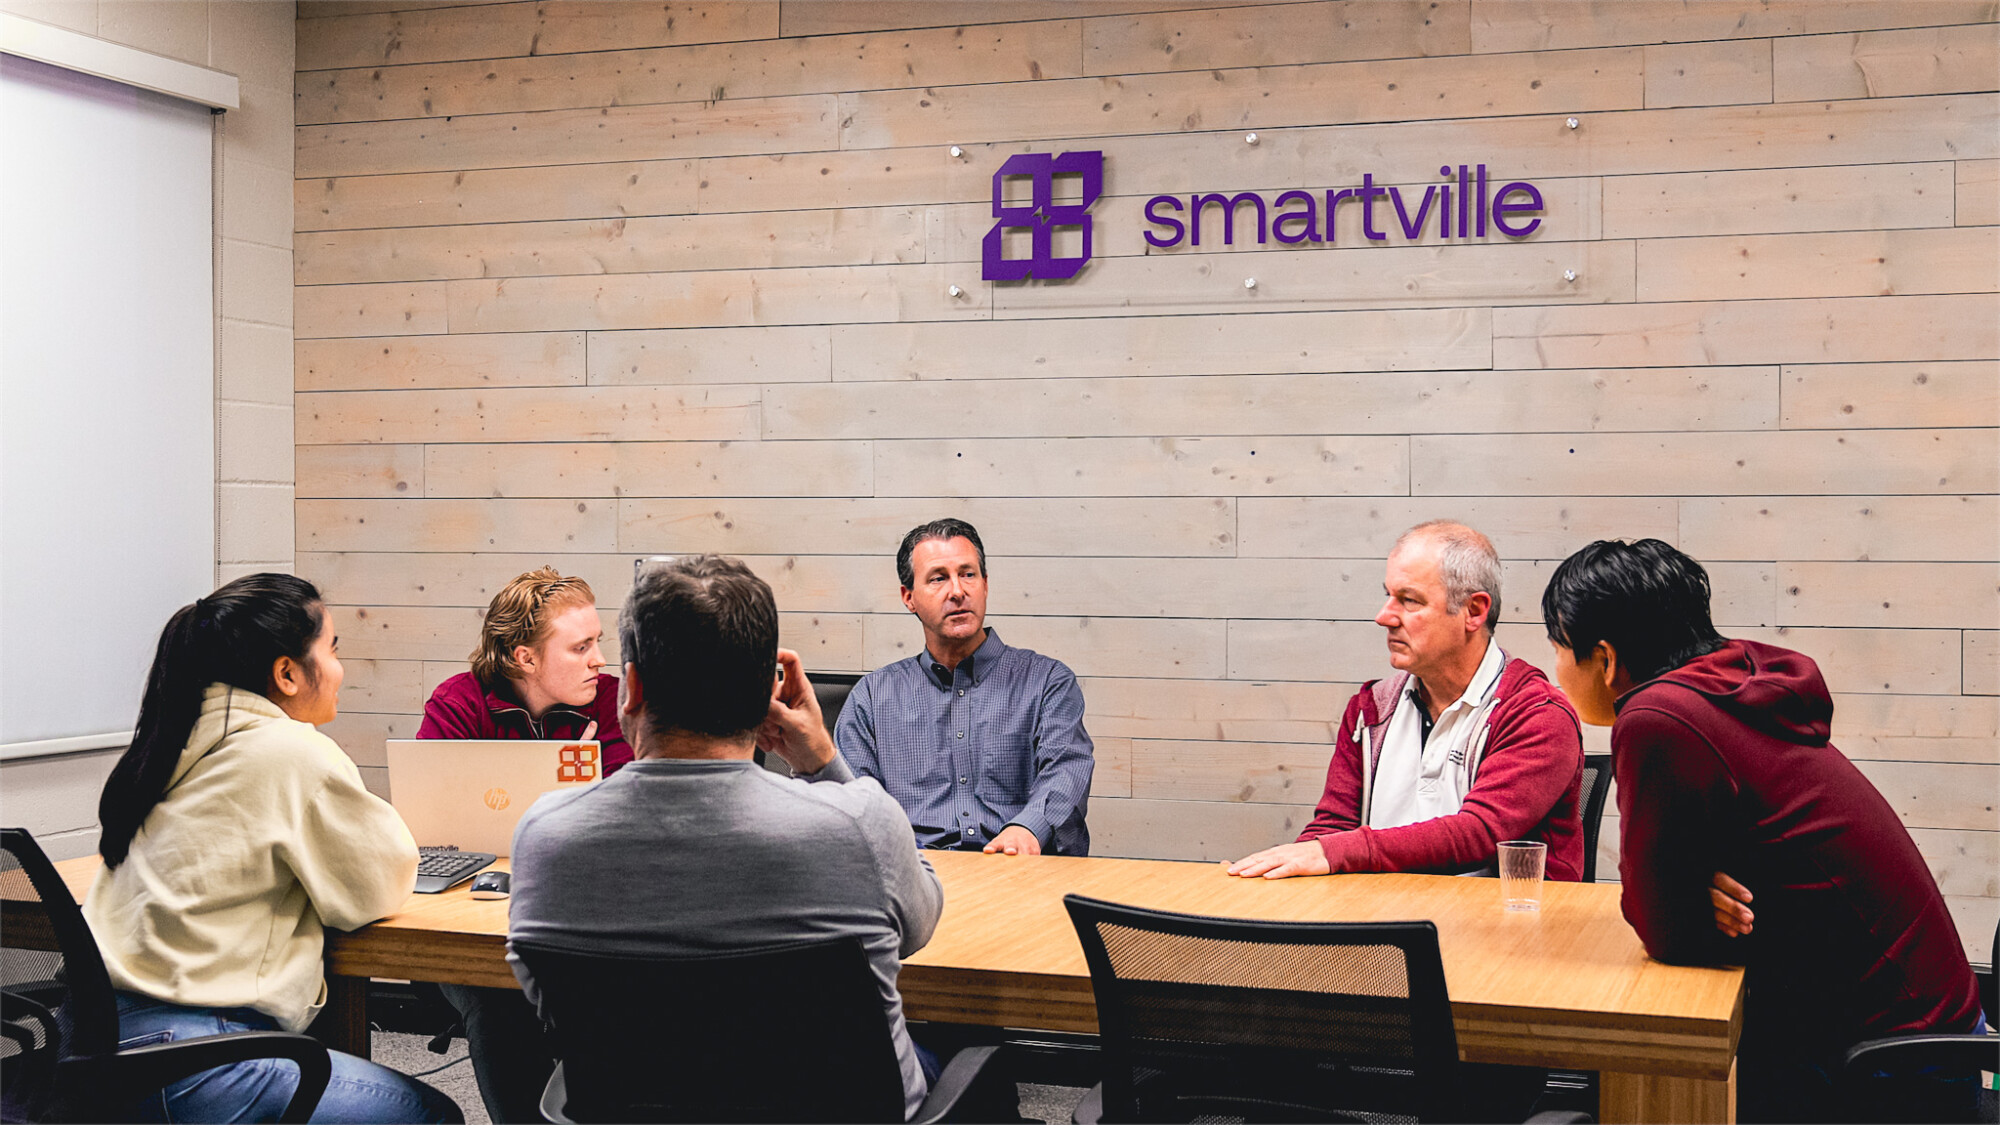 Smartville is Creating Energy Storage Solutions from Repurposed Electric Vehicle Batteries